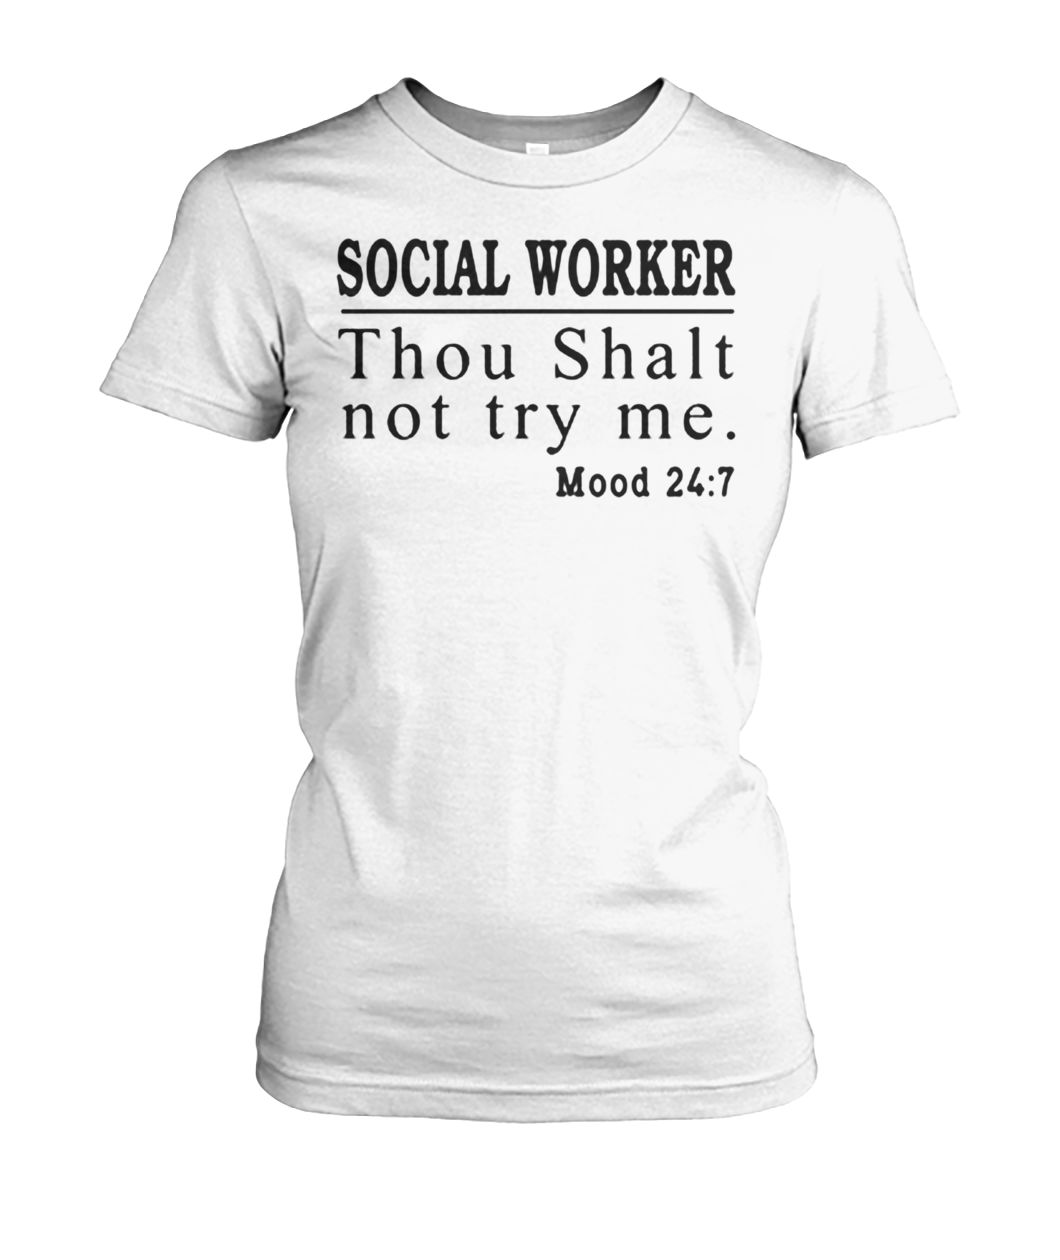 Social worker thou shall not try me mood 247 women's crew tee